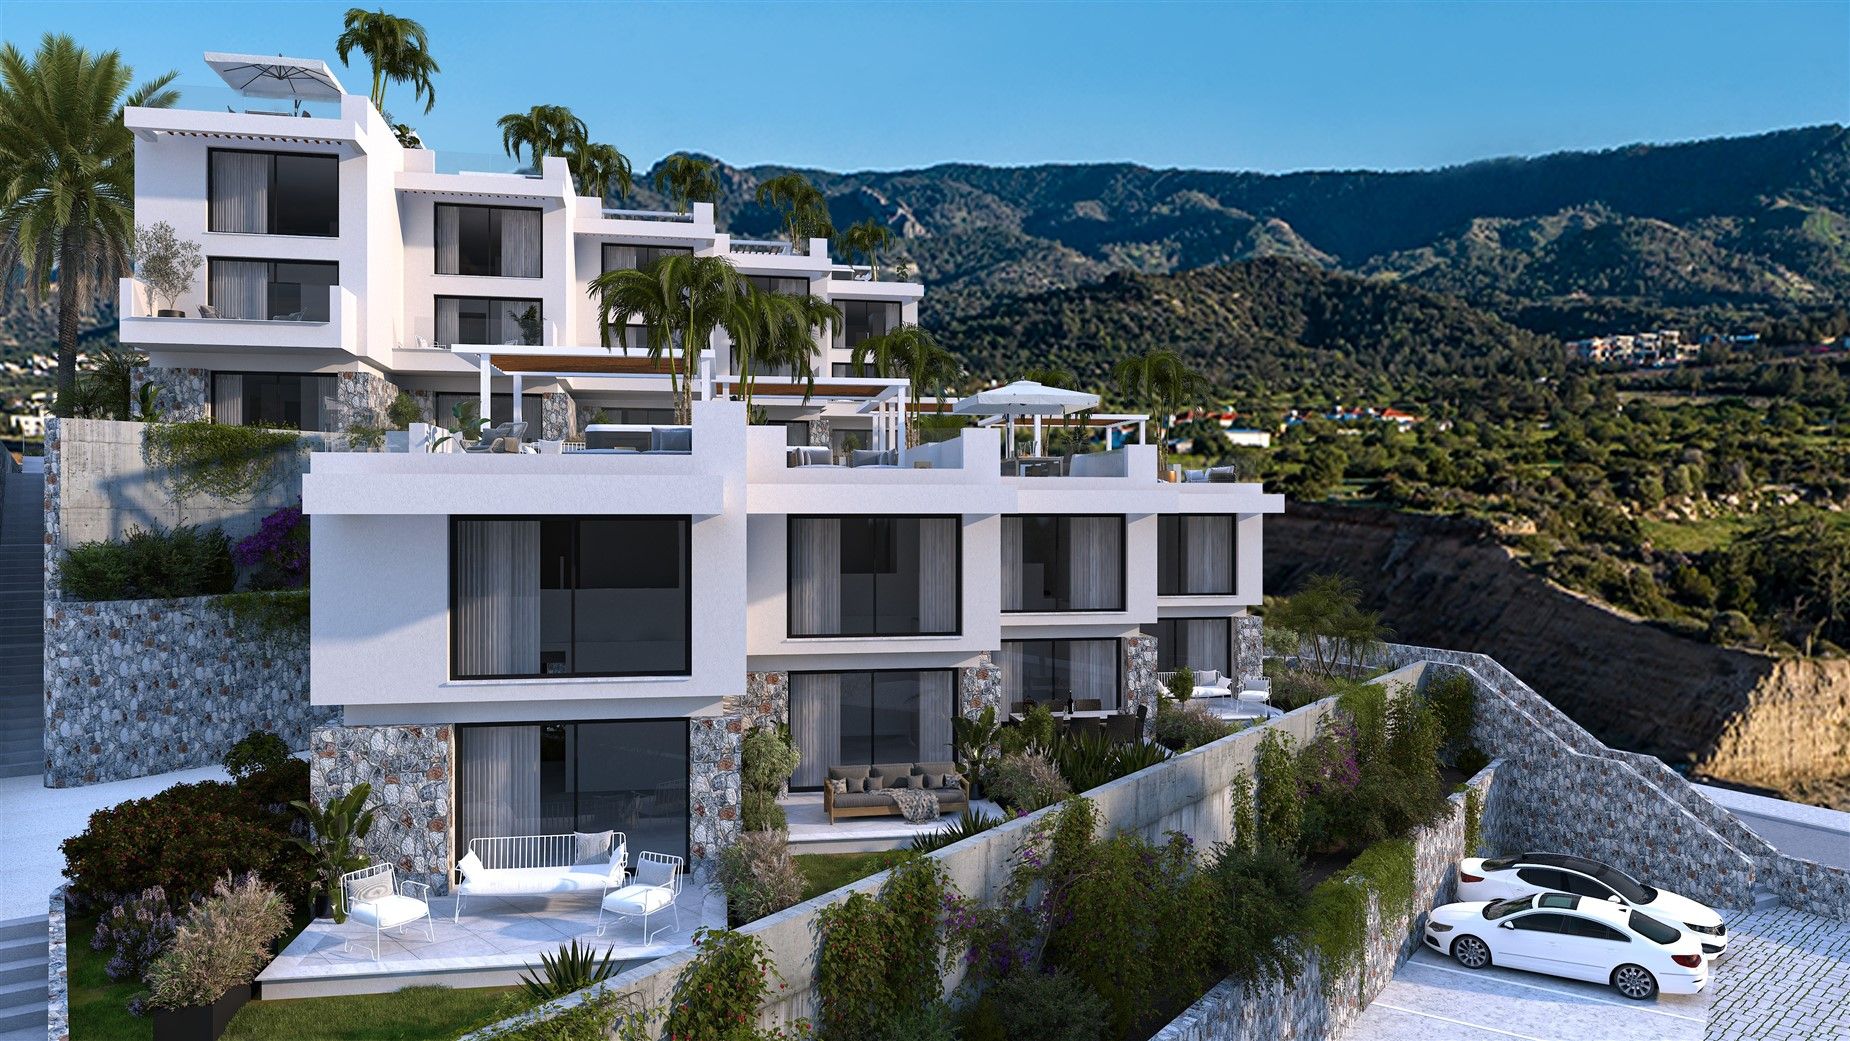 New duplex apartments by the sea in North Cyprus